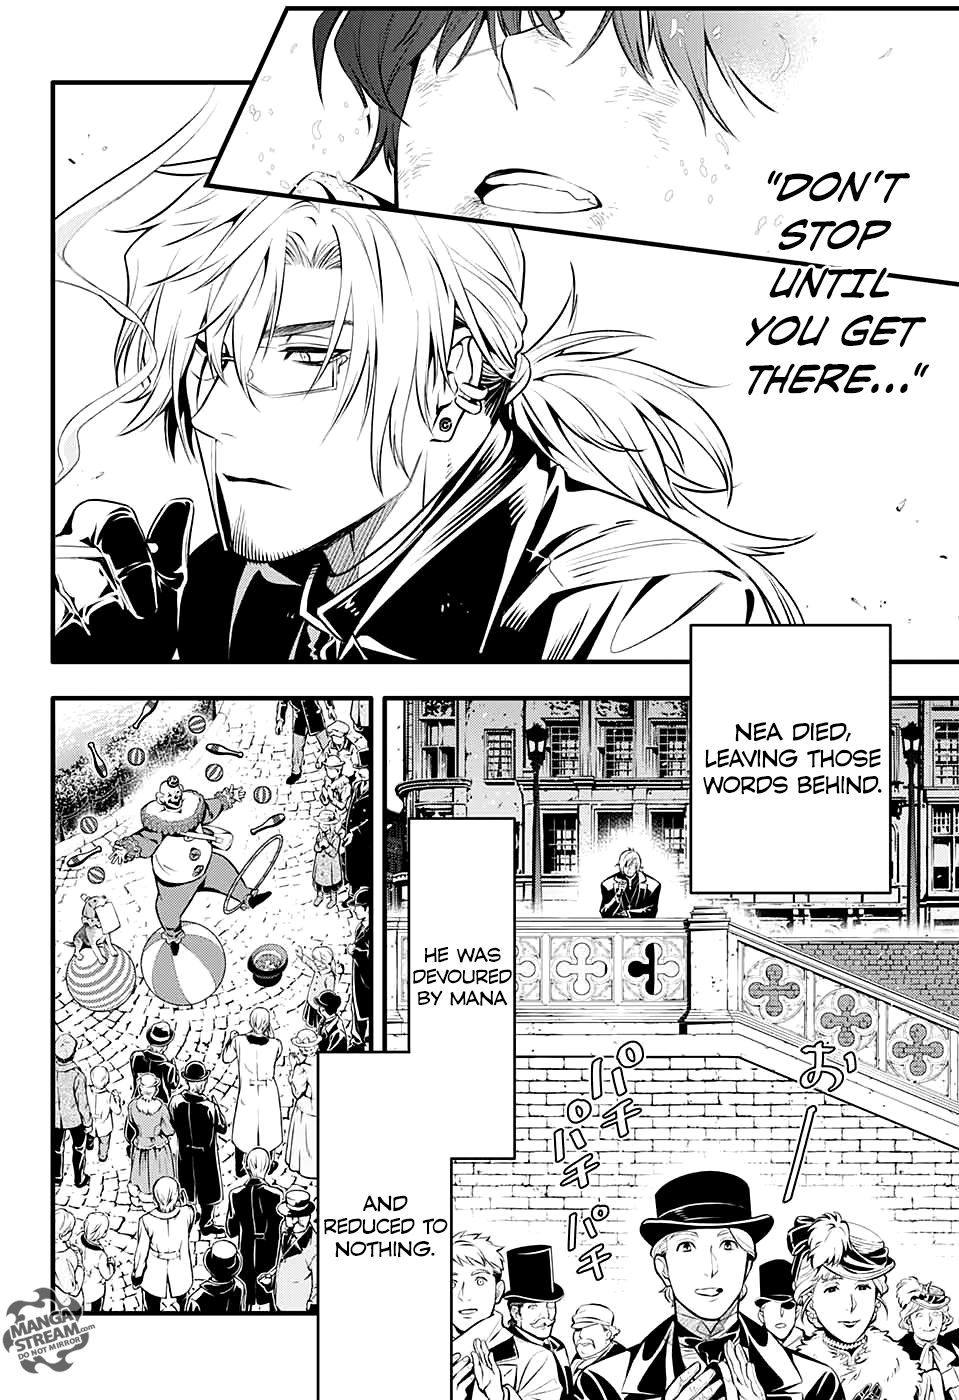 D.Gray-man chapter 234 page 4